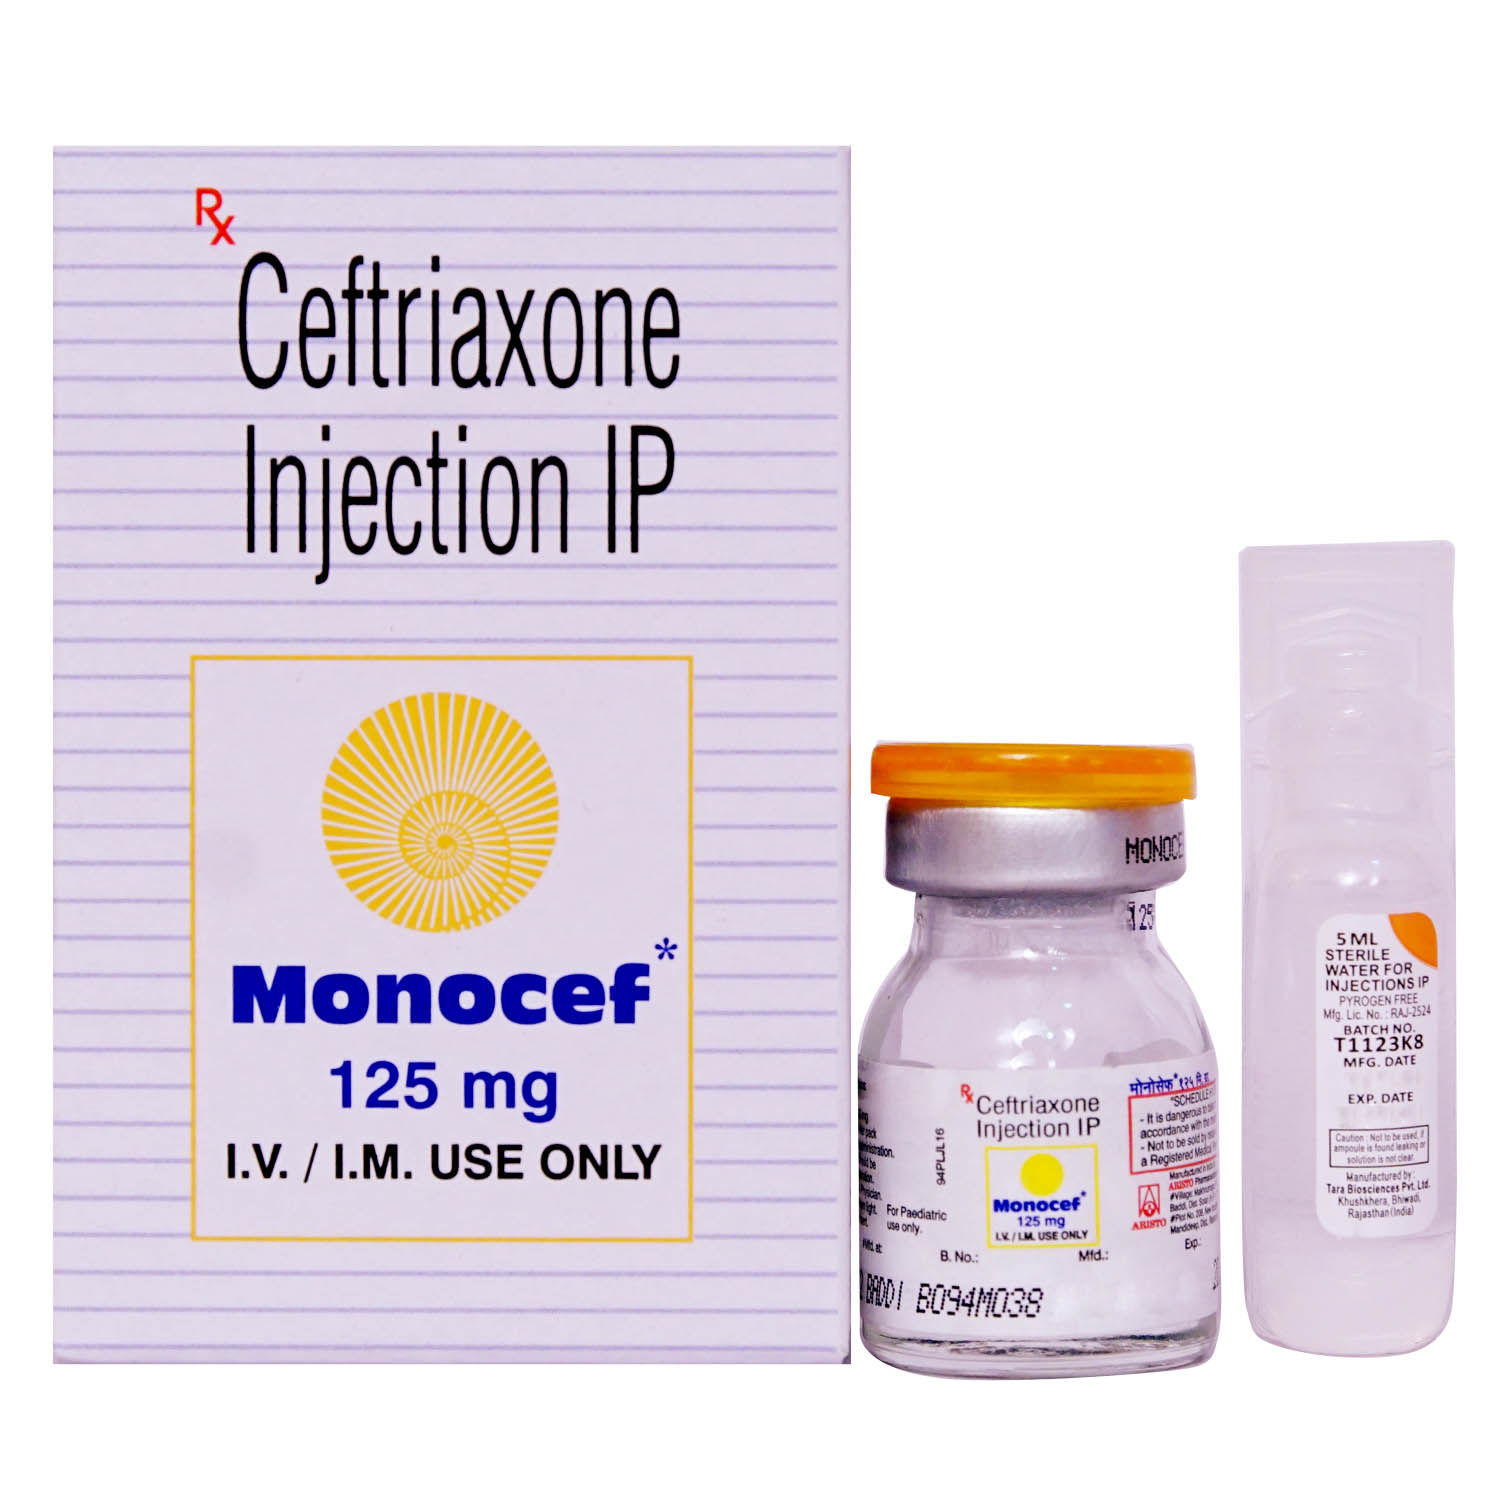 MONOCEF INJECTION 125MG Price, Uses, Side Effects, Composition - Apollo Pharmacy